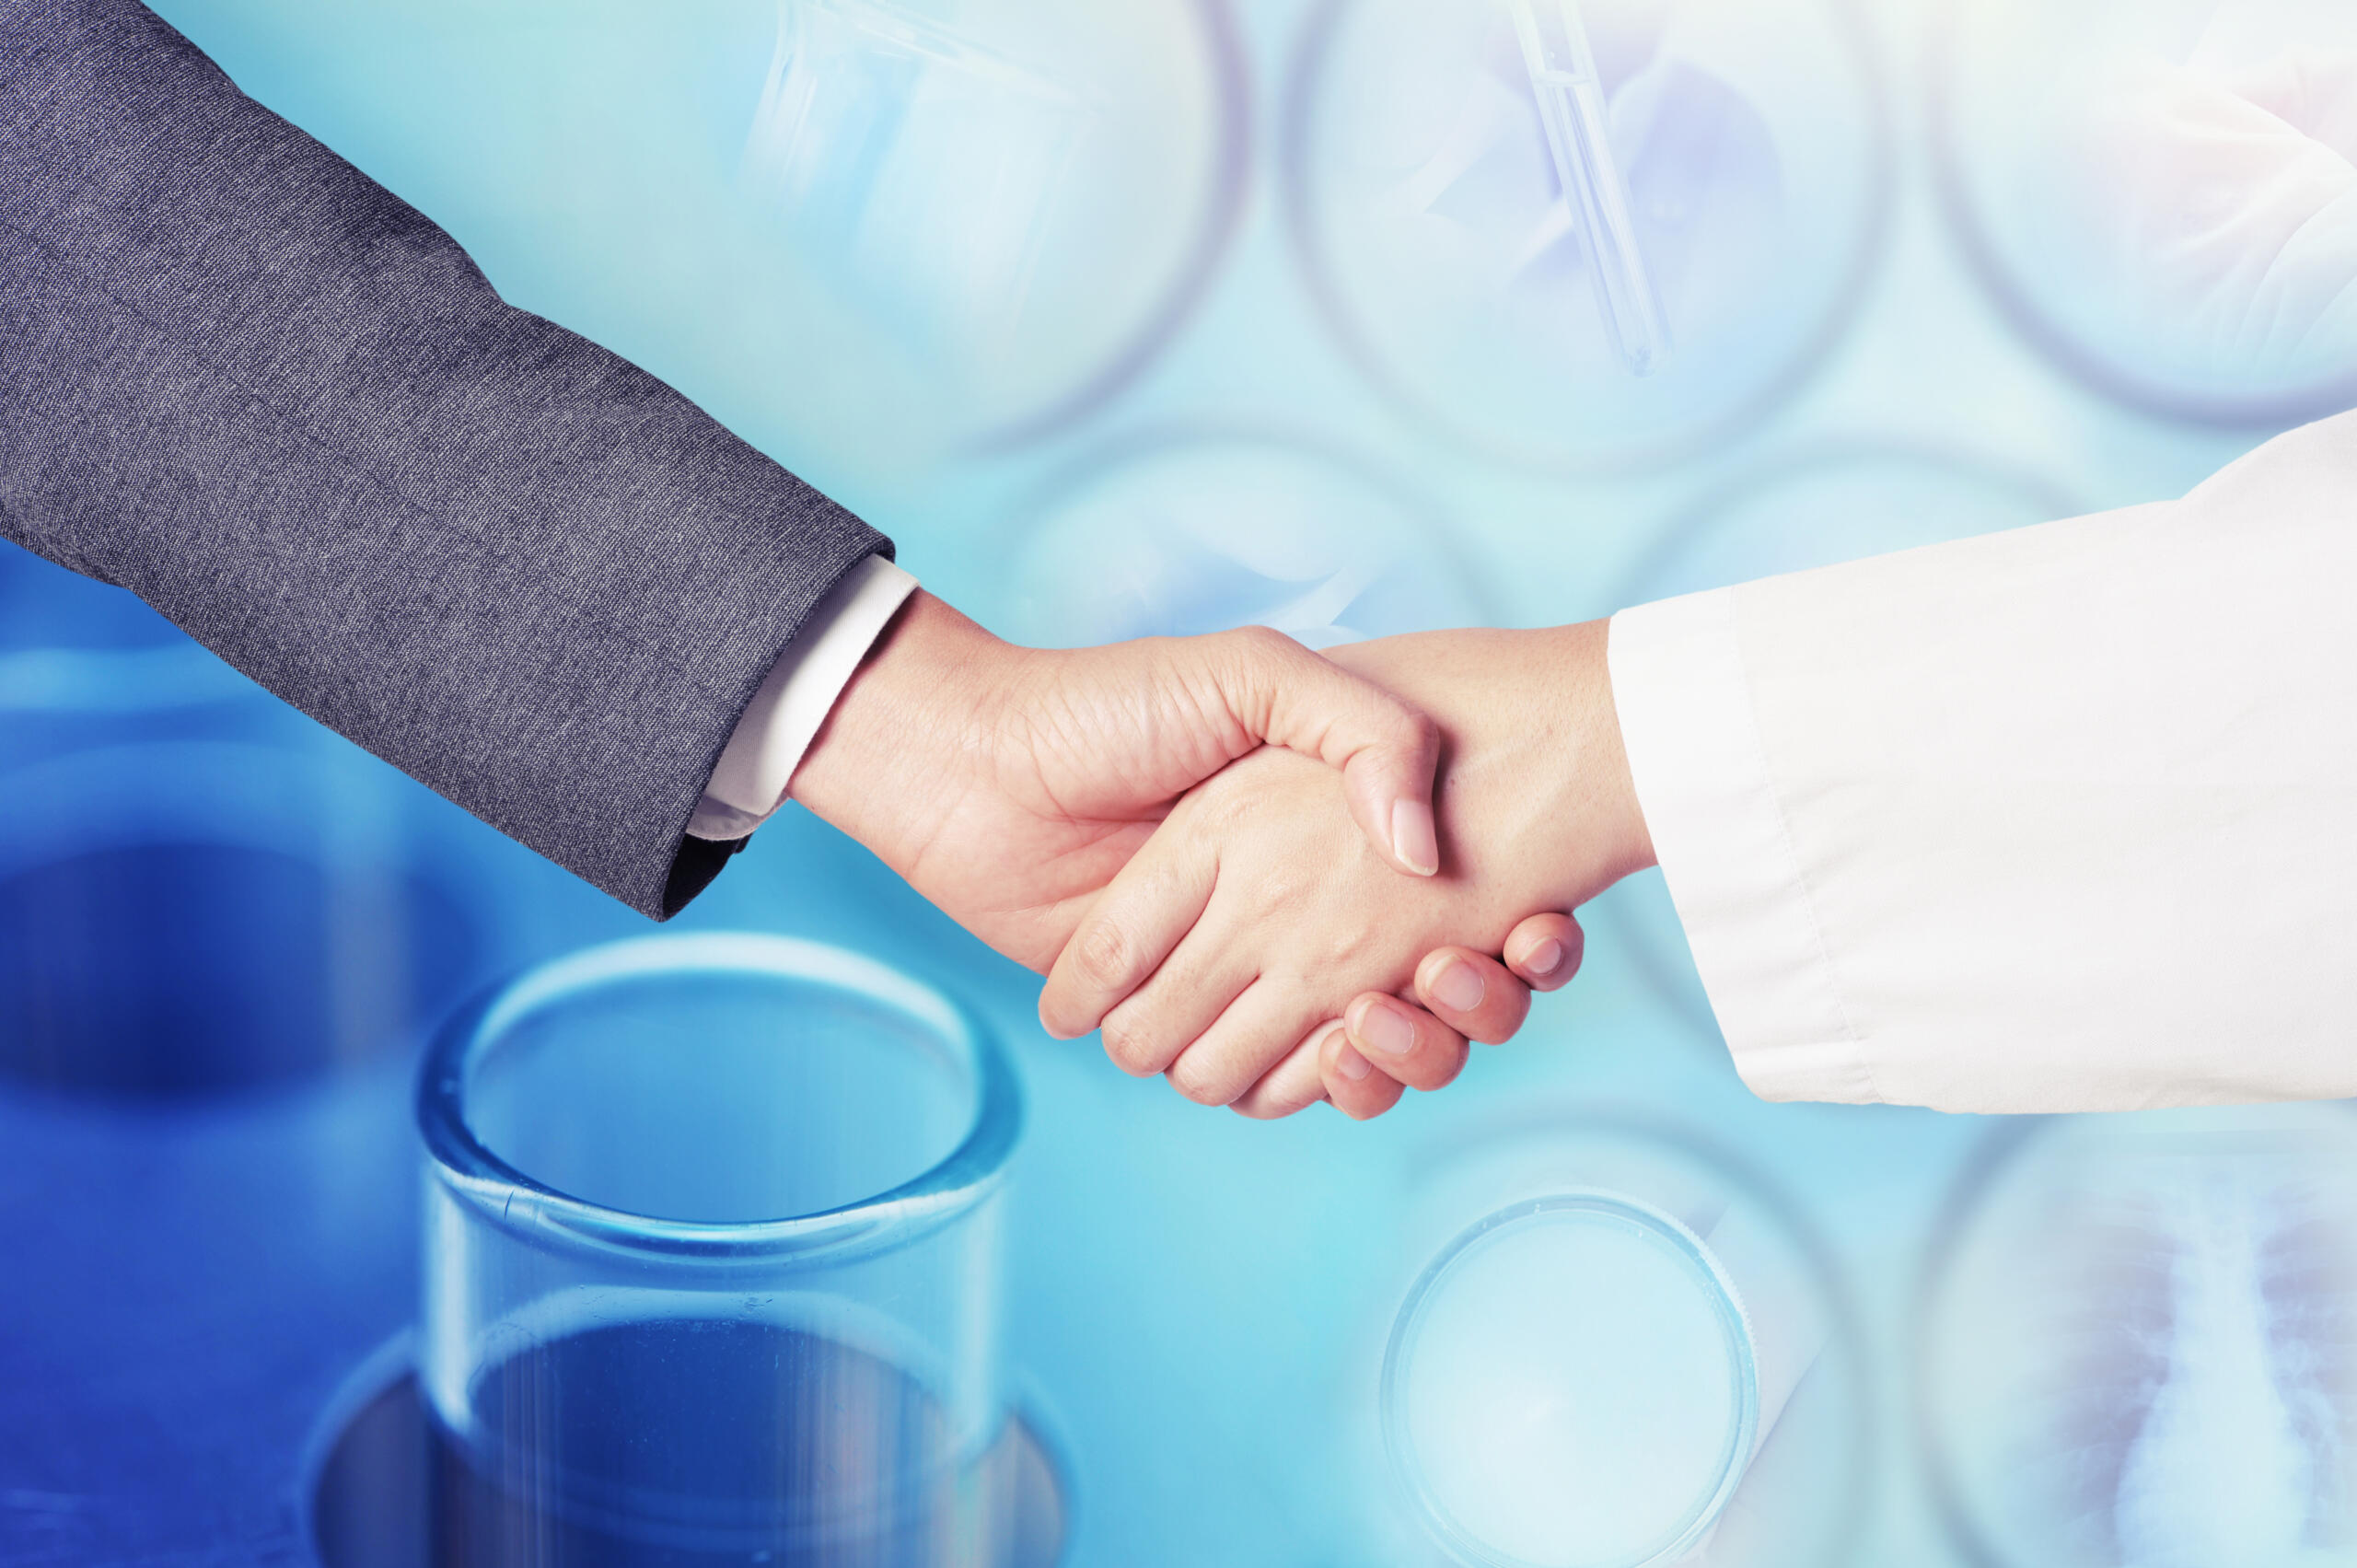 business man hand shake with doctor, background consisting of test tubes and other scientific instruments.